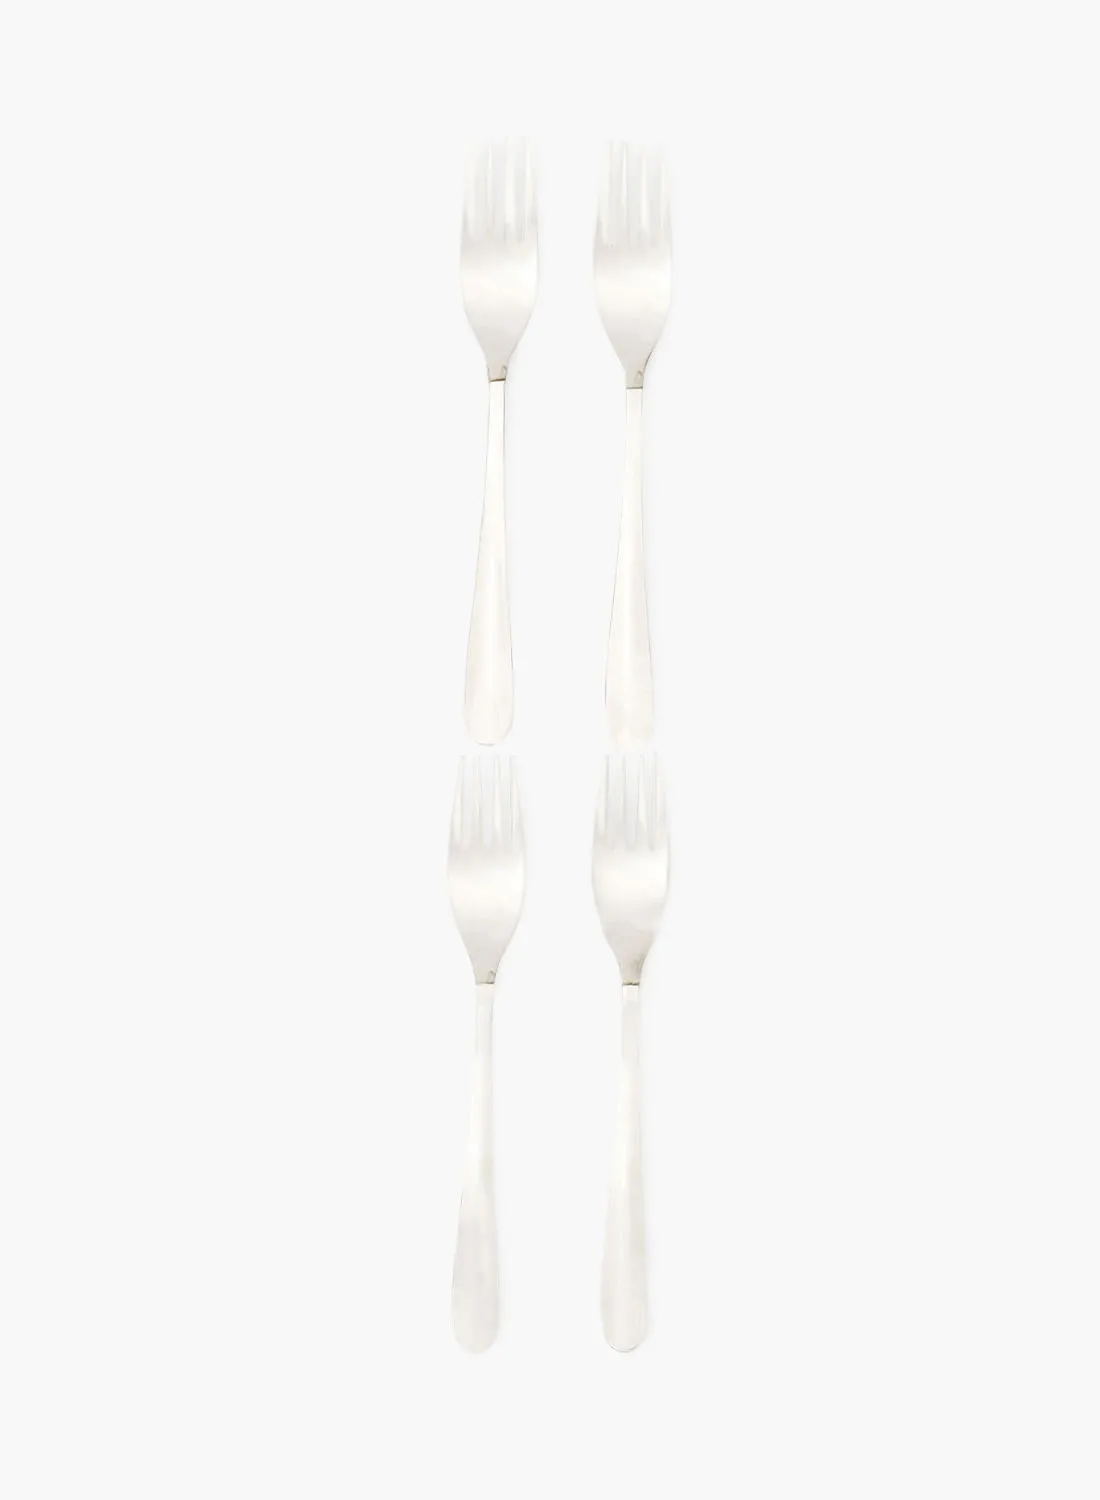 Amal 4 Piece Forks Set - Made Of Stainless Steel - Silverware Flatware - Fork Set - Serves 4 - Design Silver Daisy